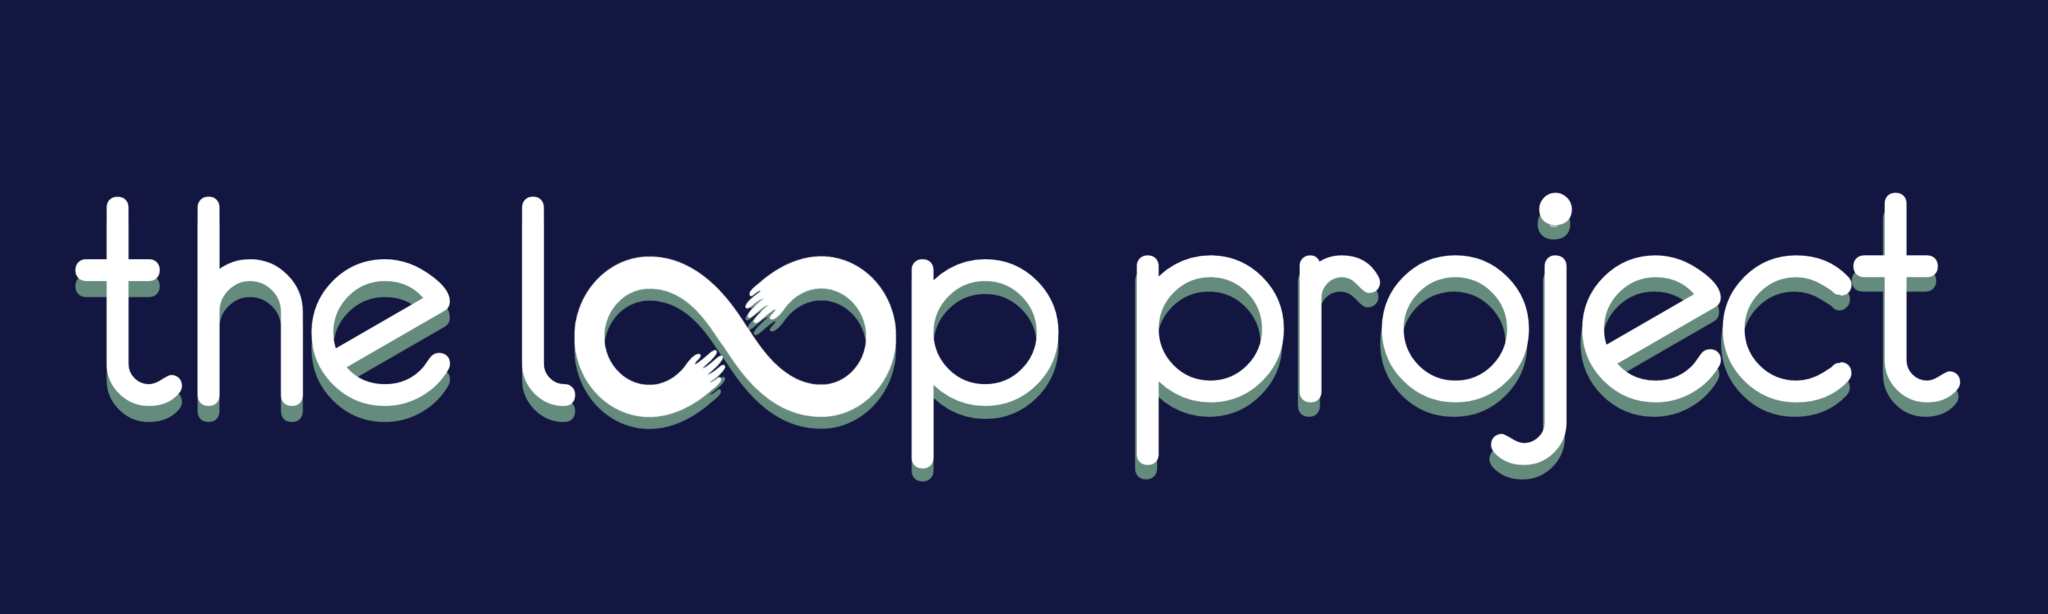 logo_the_loop_project